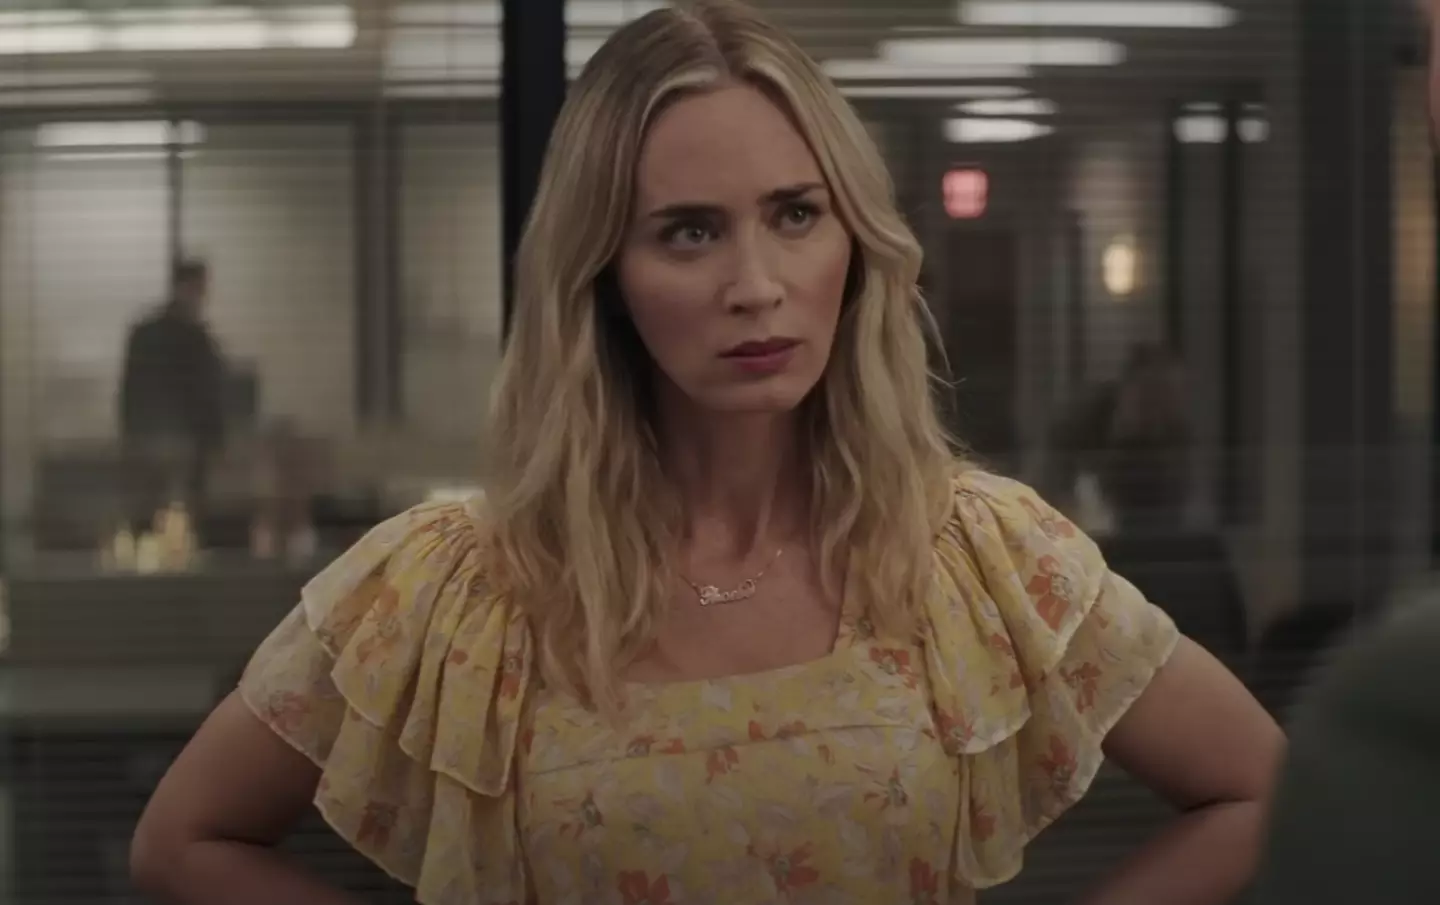 A Wolf of Wall Street style movie but with Emily Blunt as the lead? Yes please.